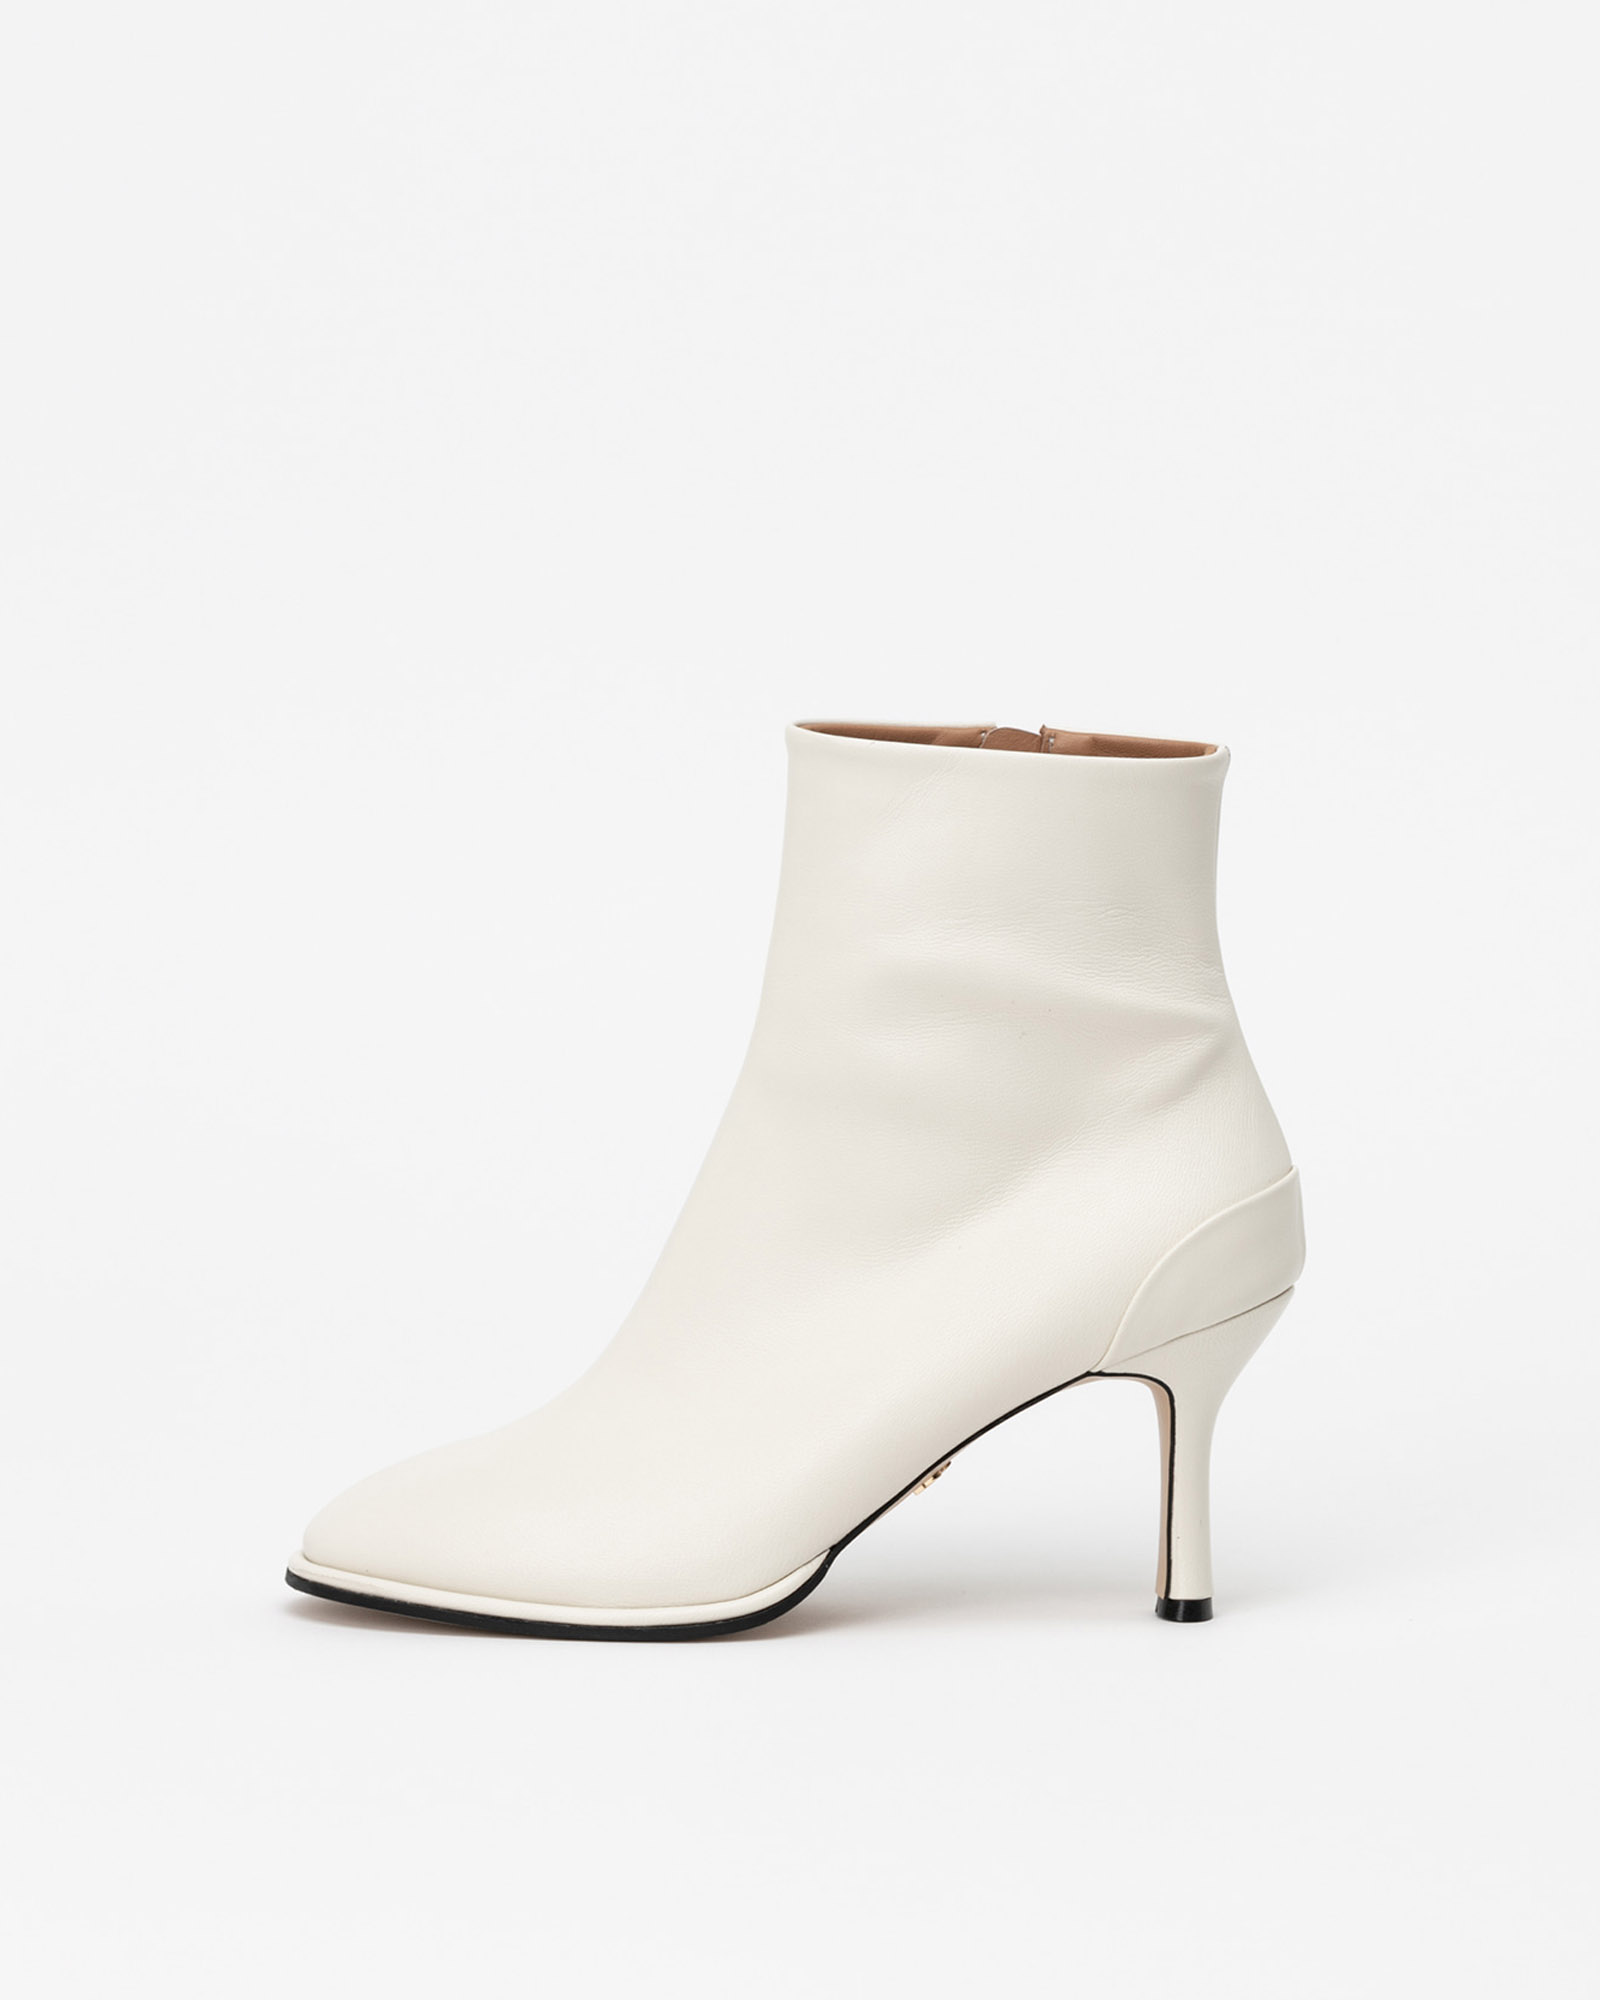 Serencia Boots in Ivory